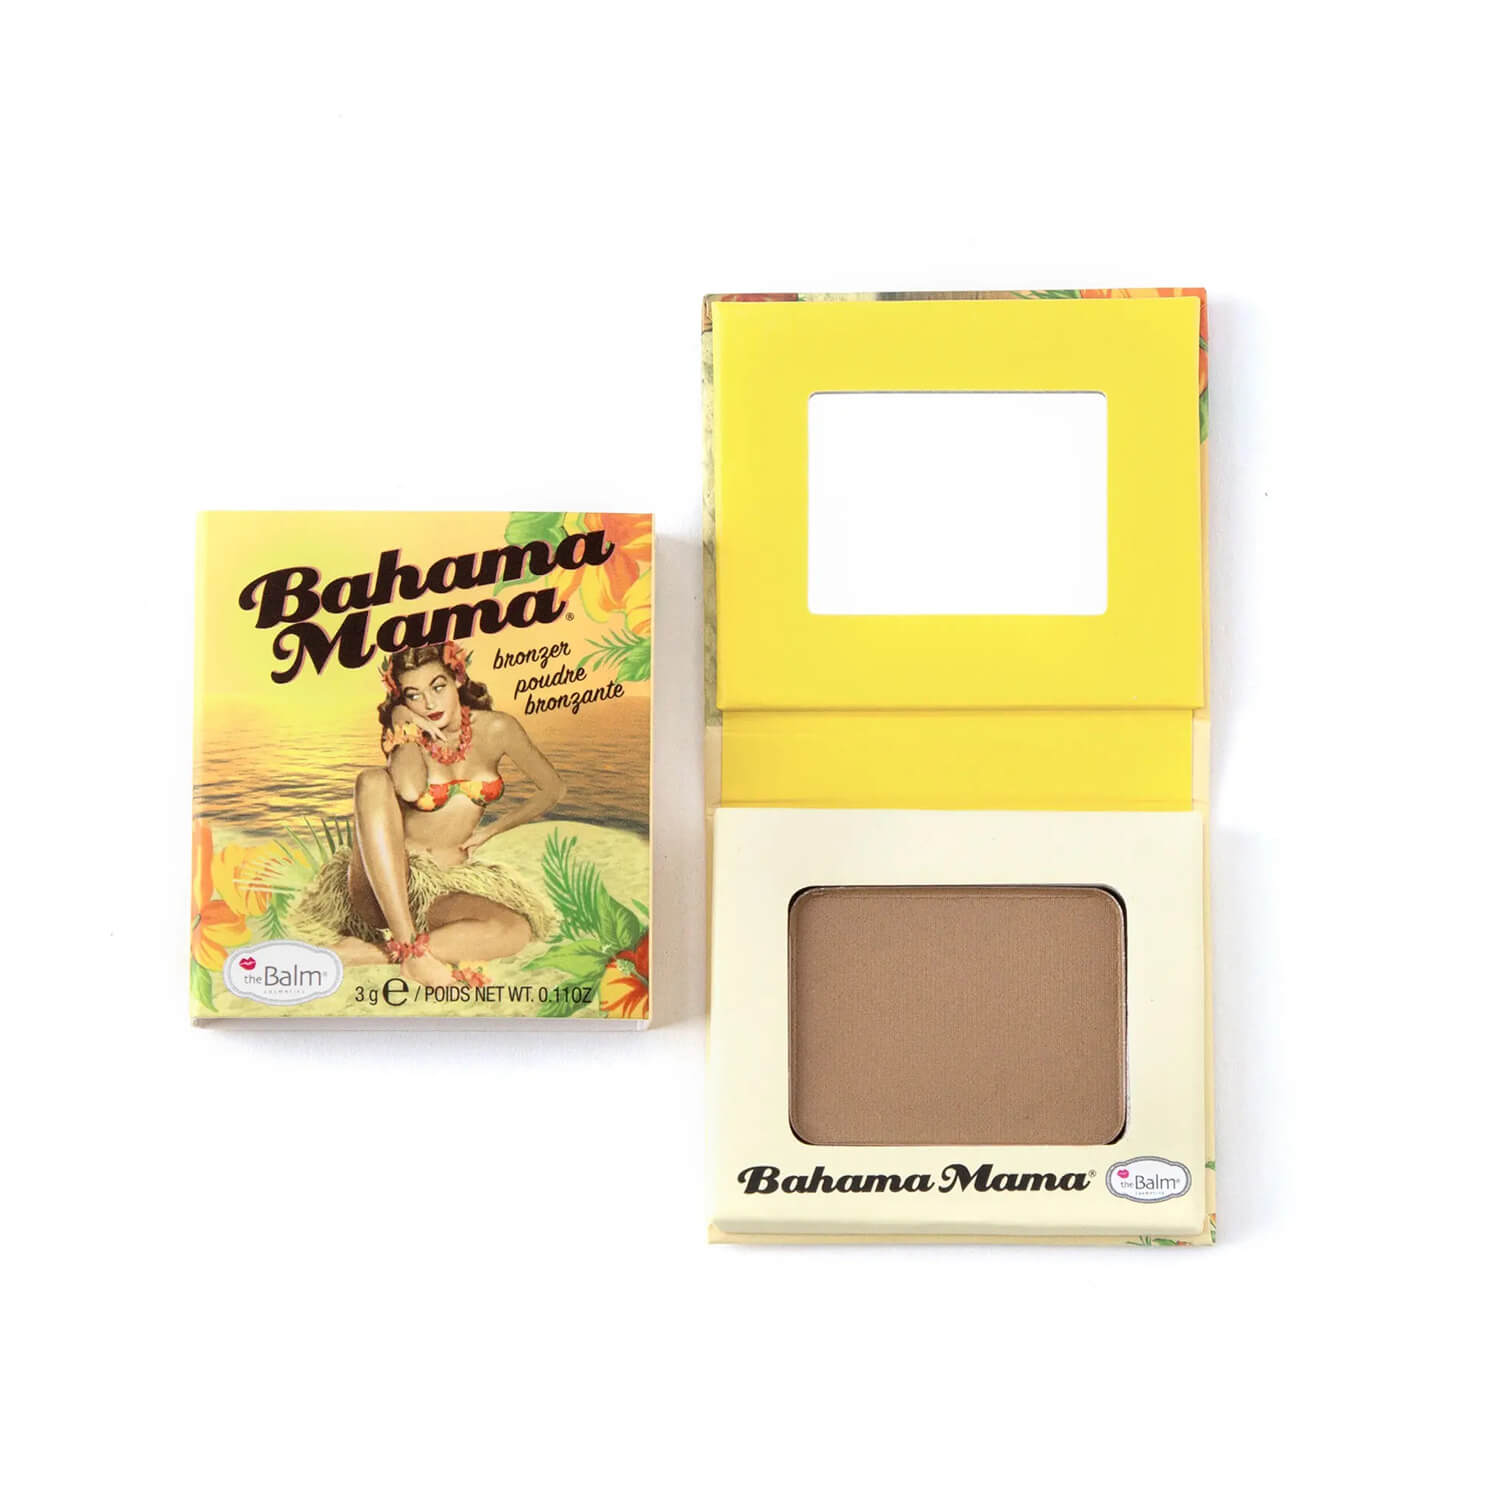 the balm bahama mama bronzer available at heygirl.pk for delivery in Pakistan